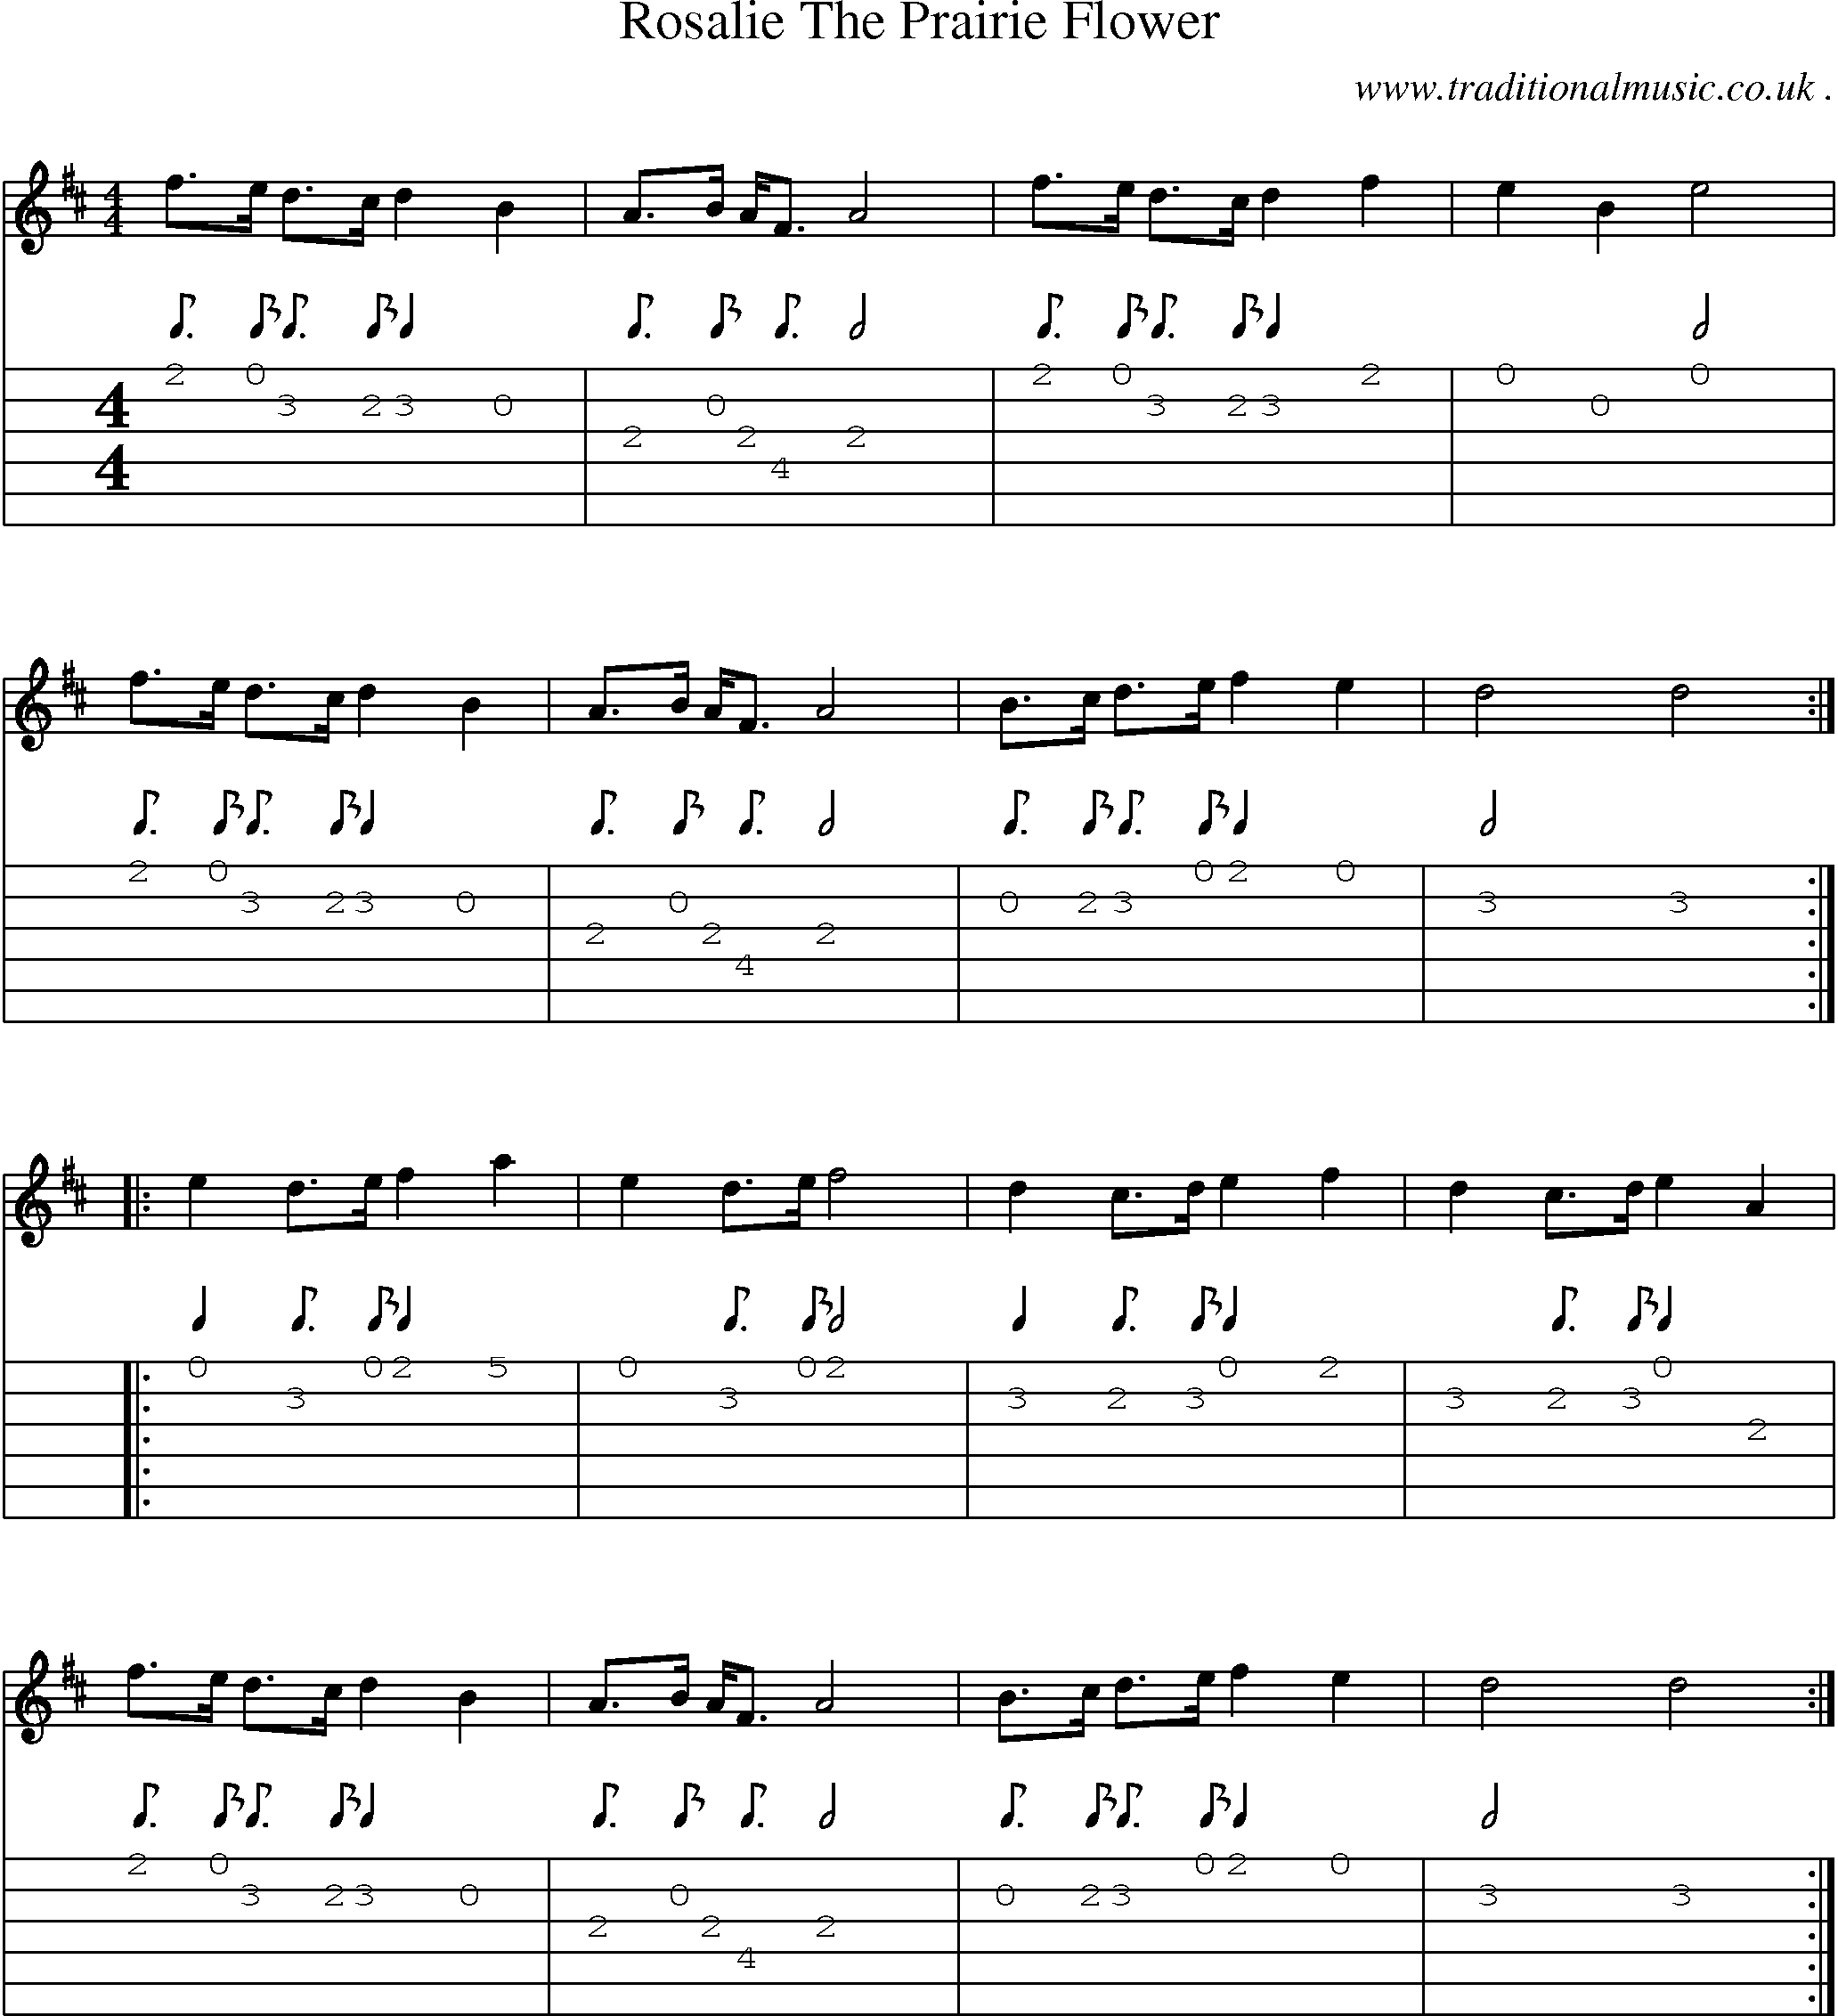 Sheet-Music and Guitar Tabs for Rosalie The Prairie Flower